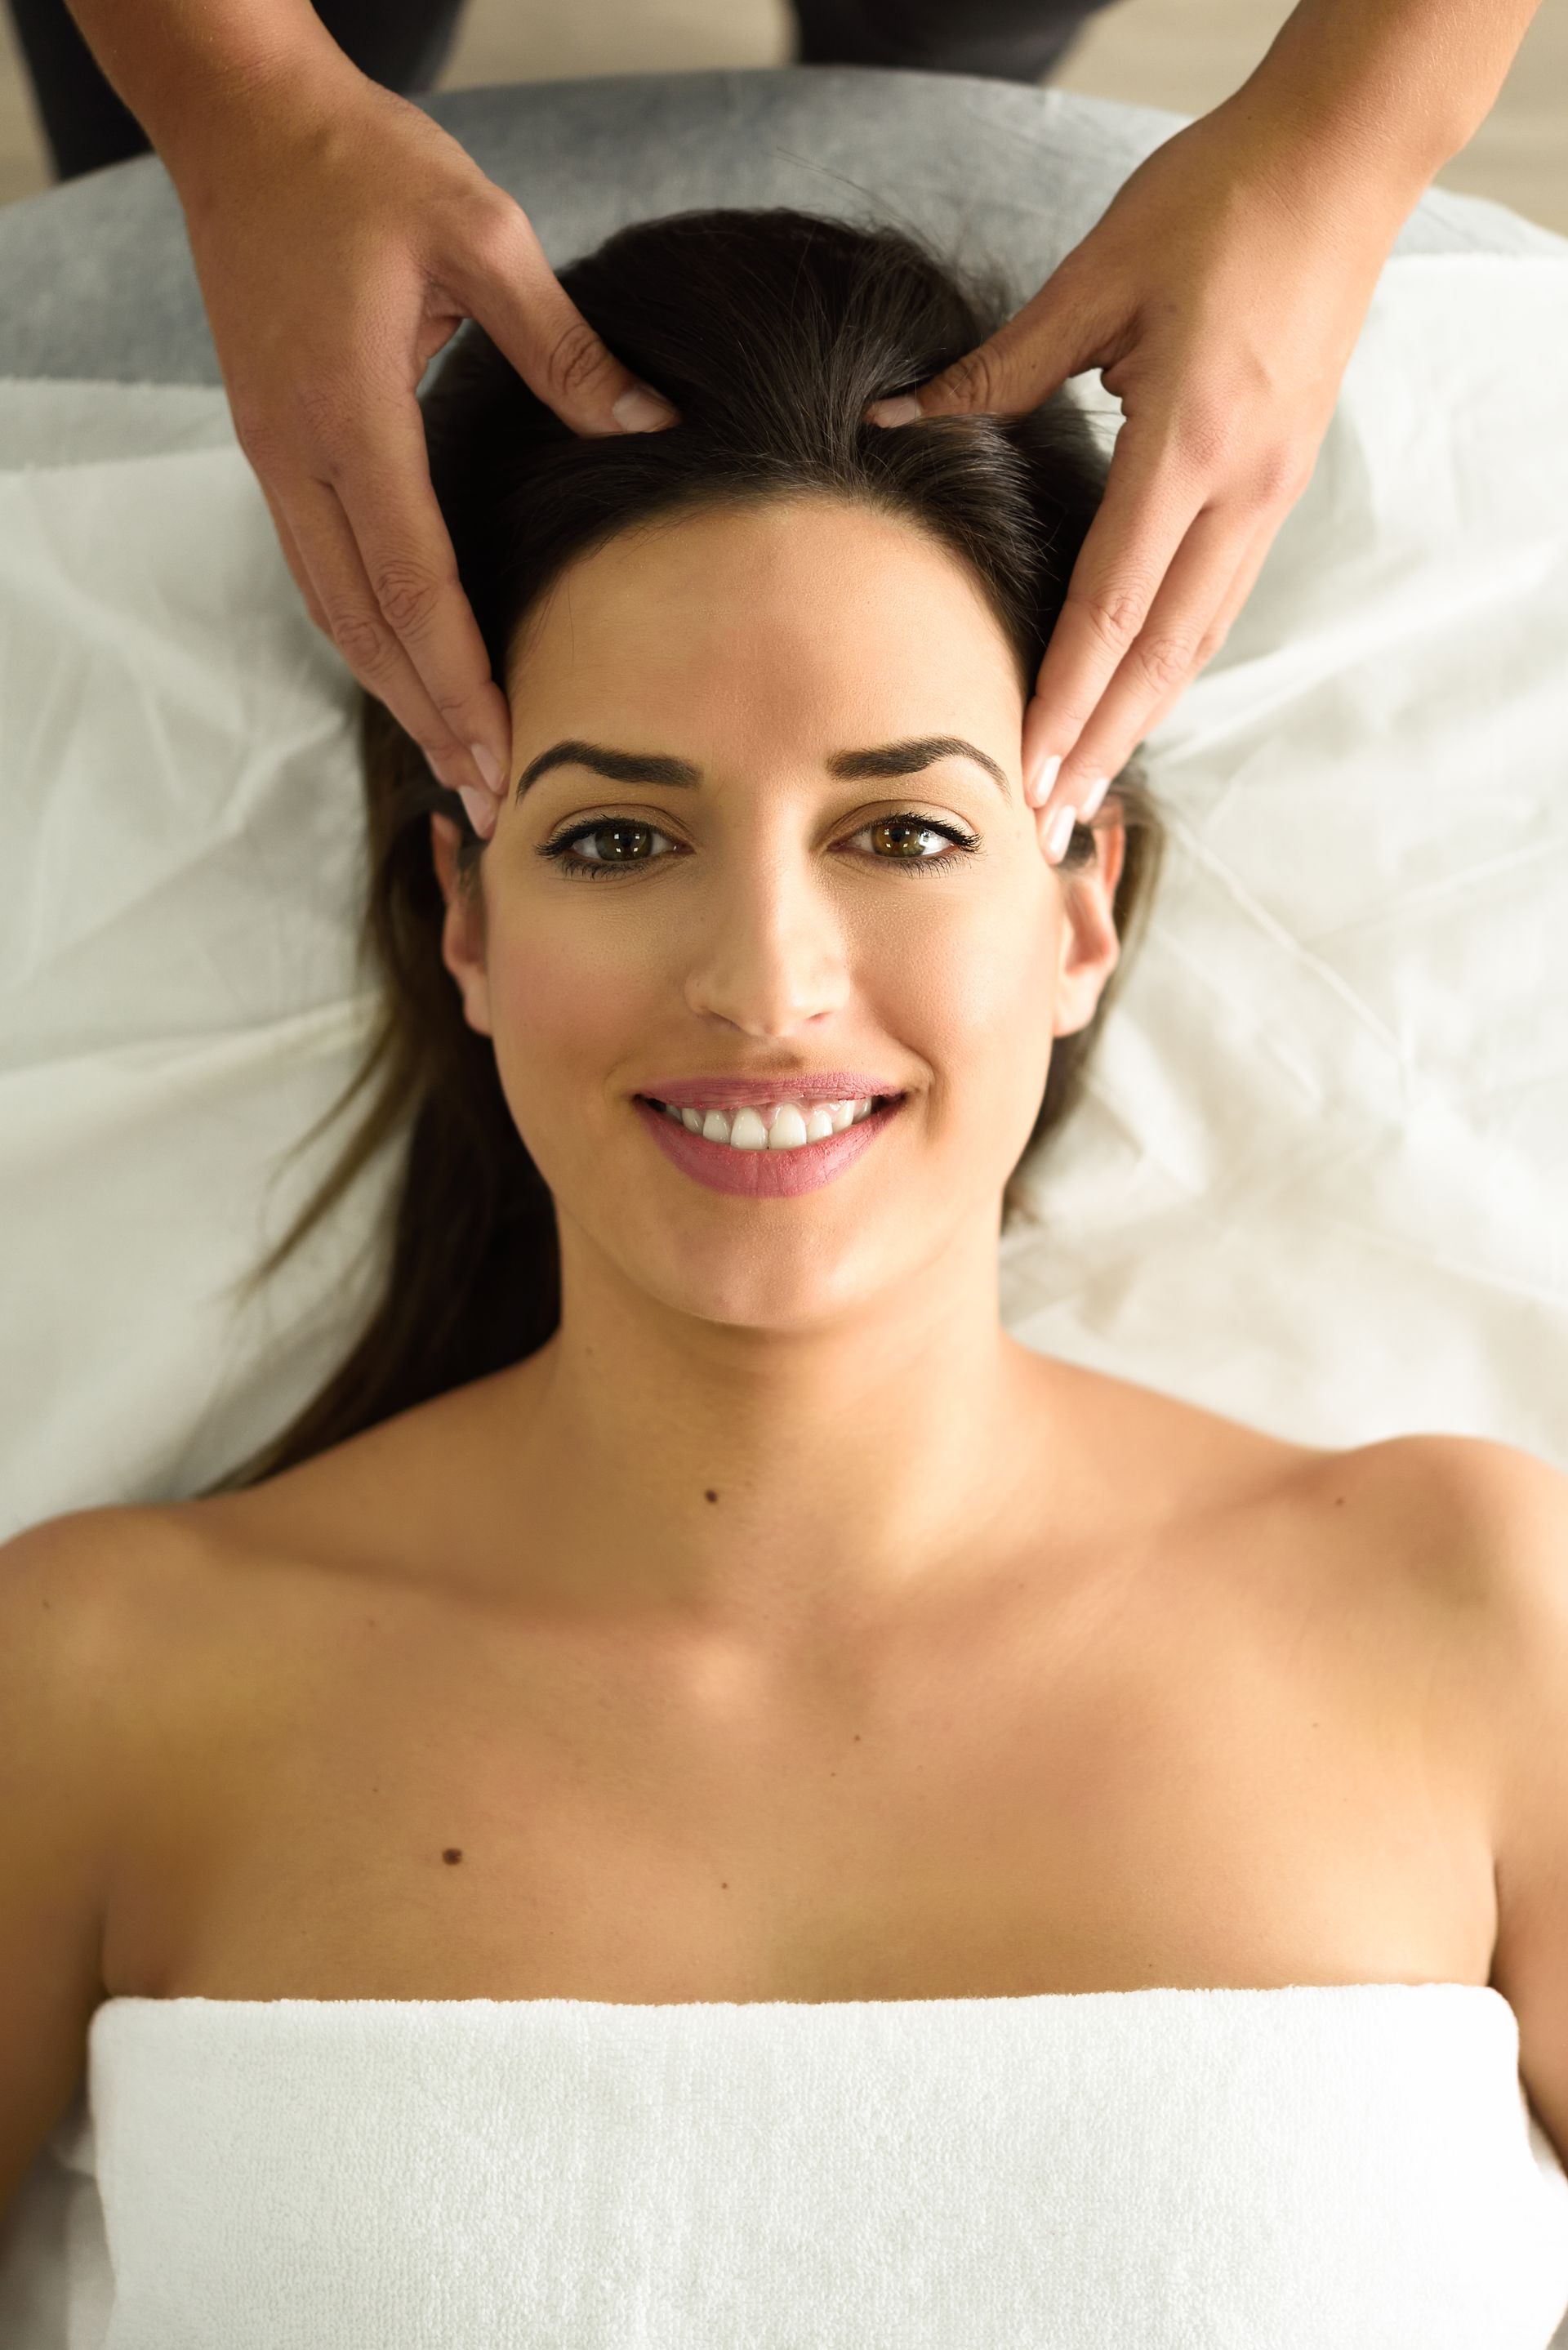 a woman is getting a head massage at a spa .